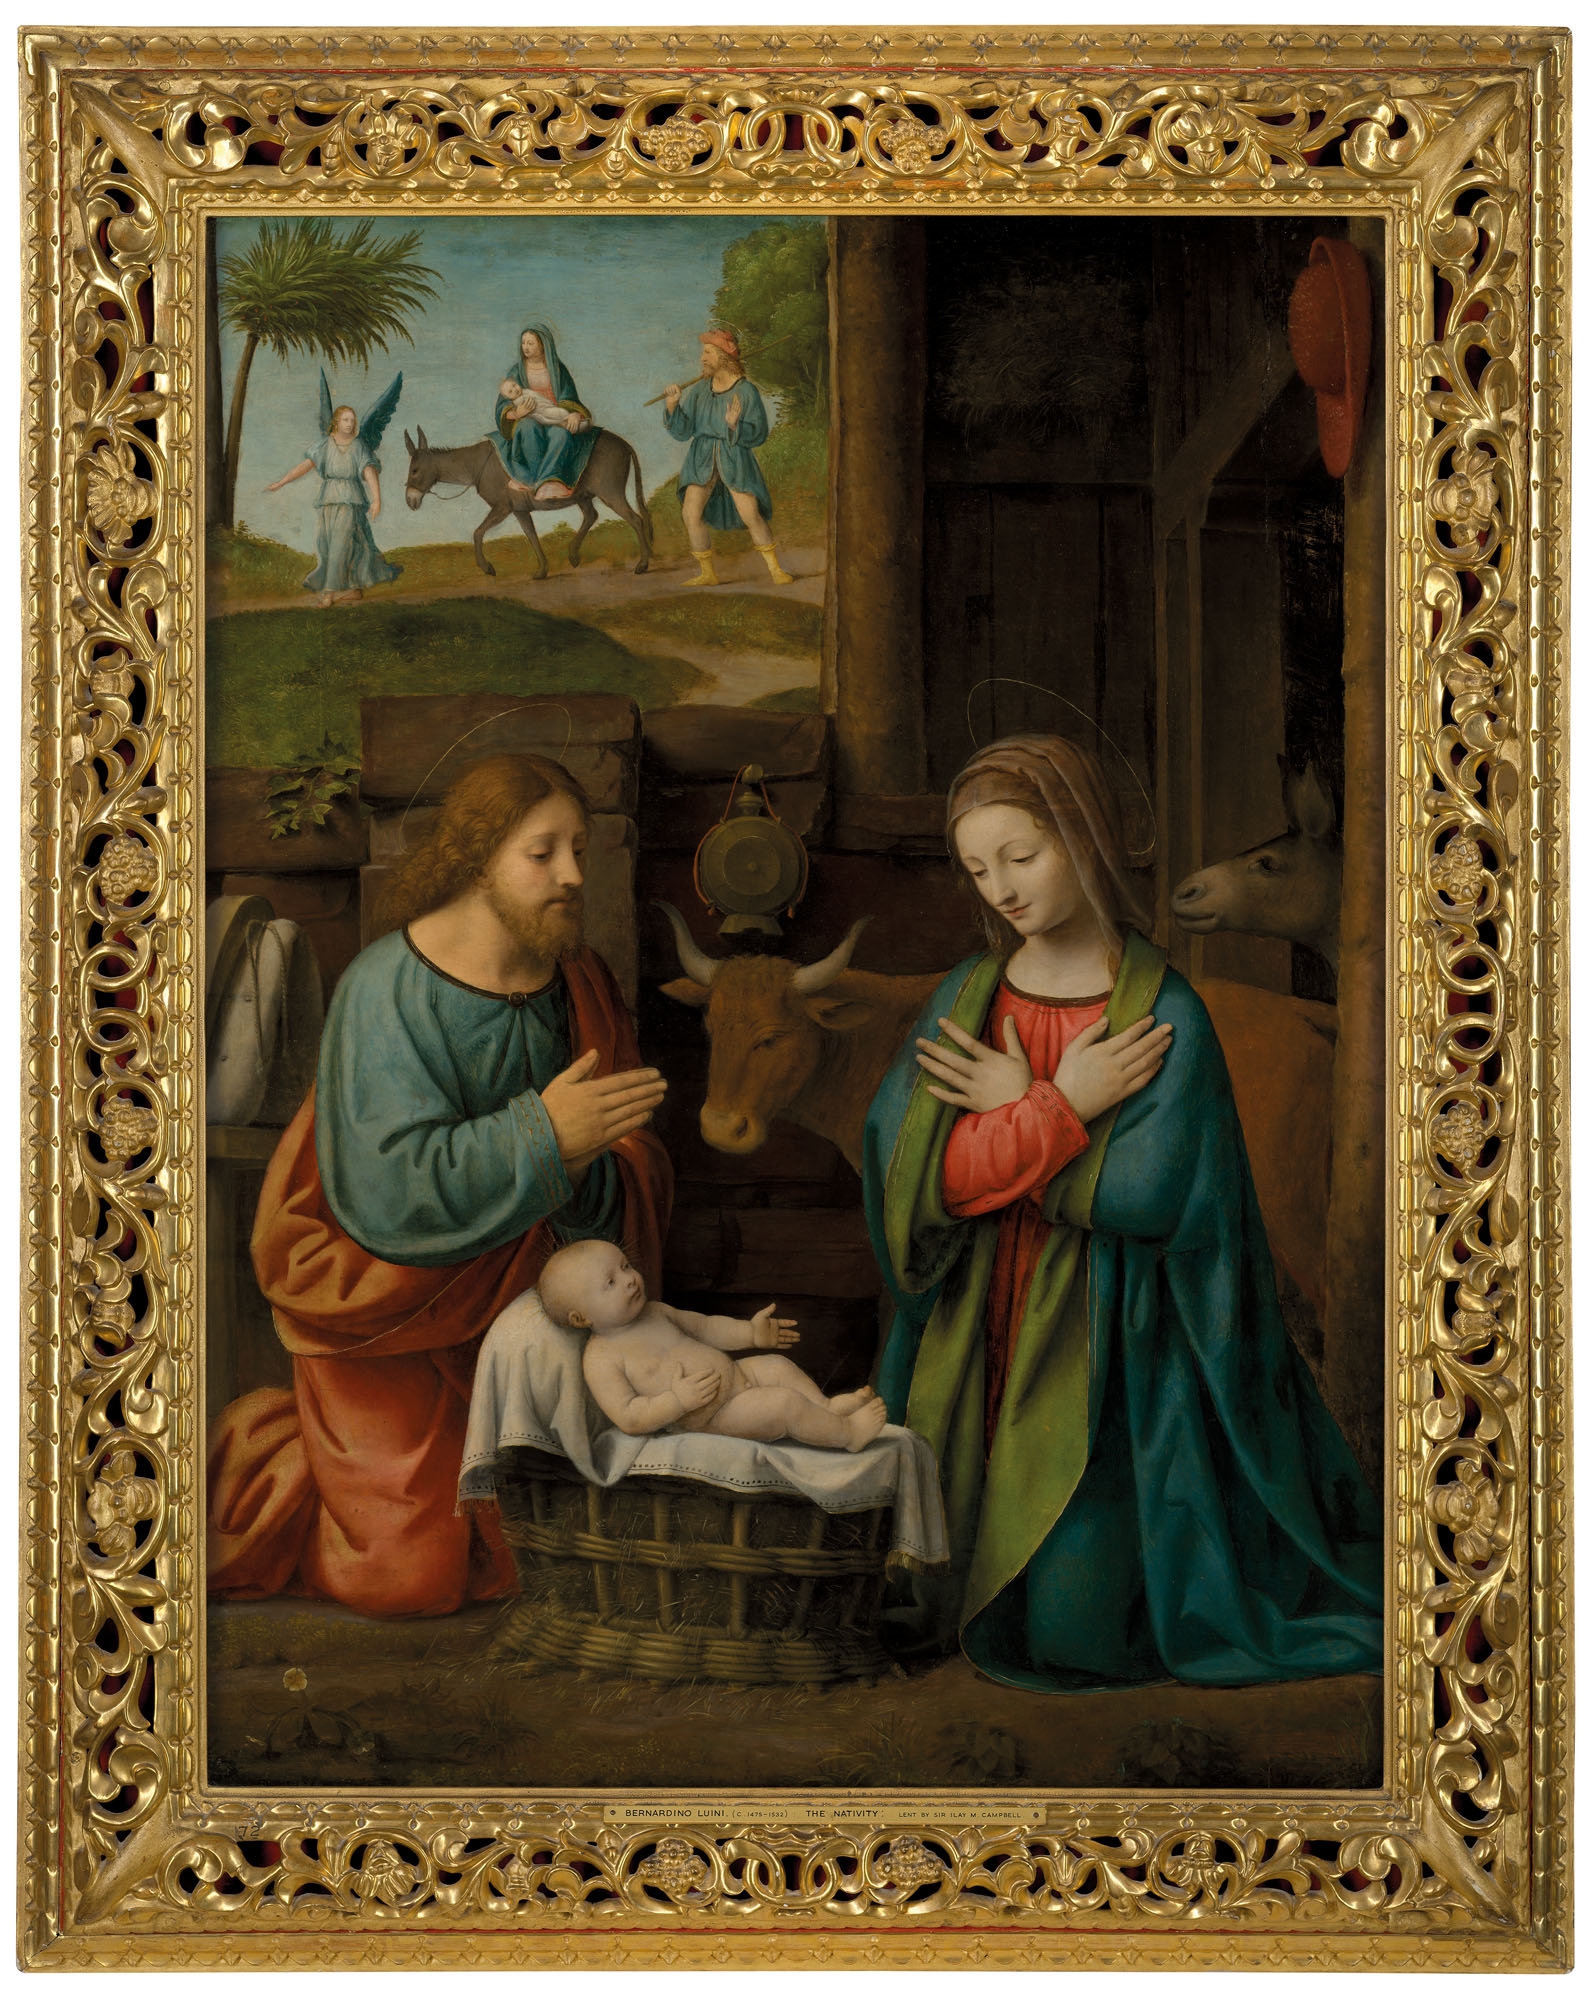 Artwork by Bernardino Luini, The Nativity, with the Journey to Egypt beyond, Made of tempera and oil on panel